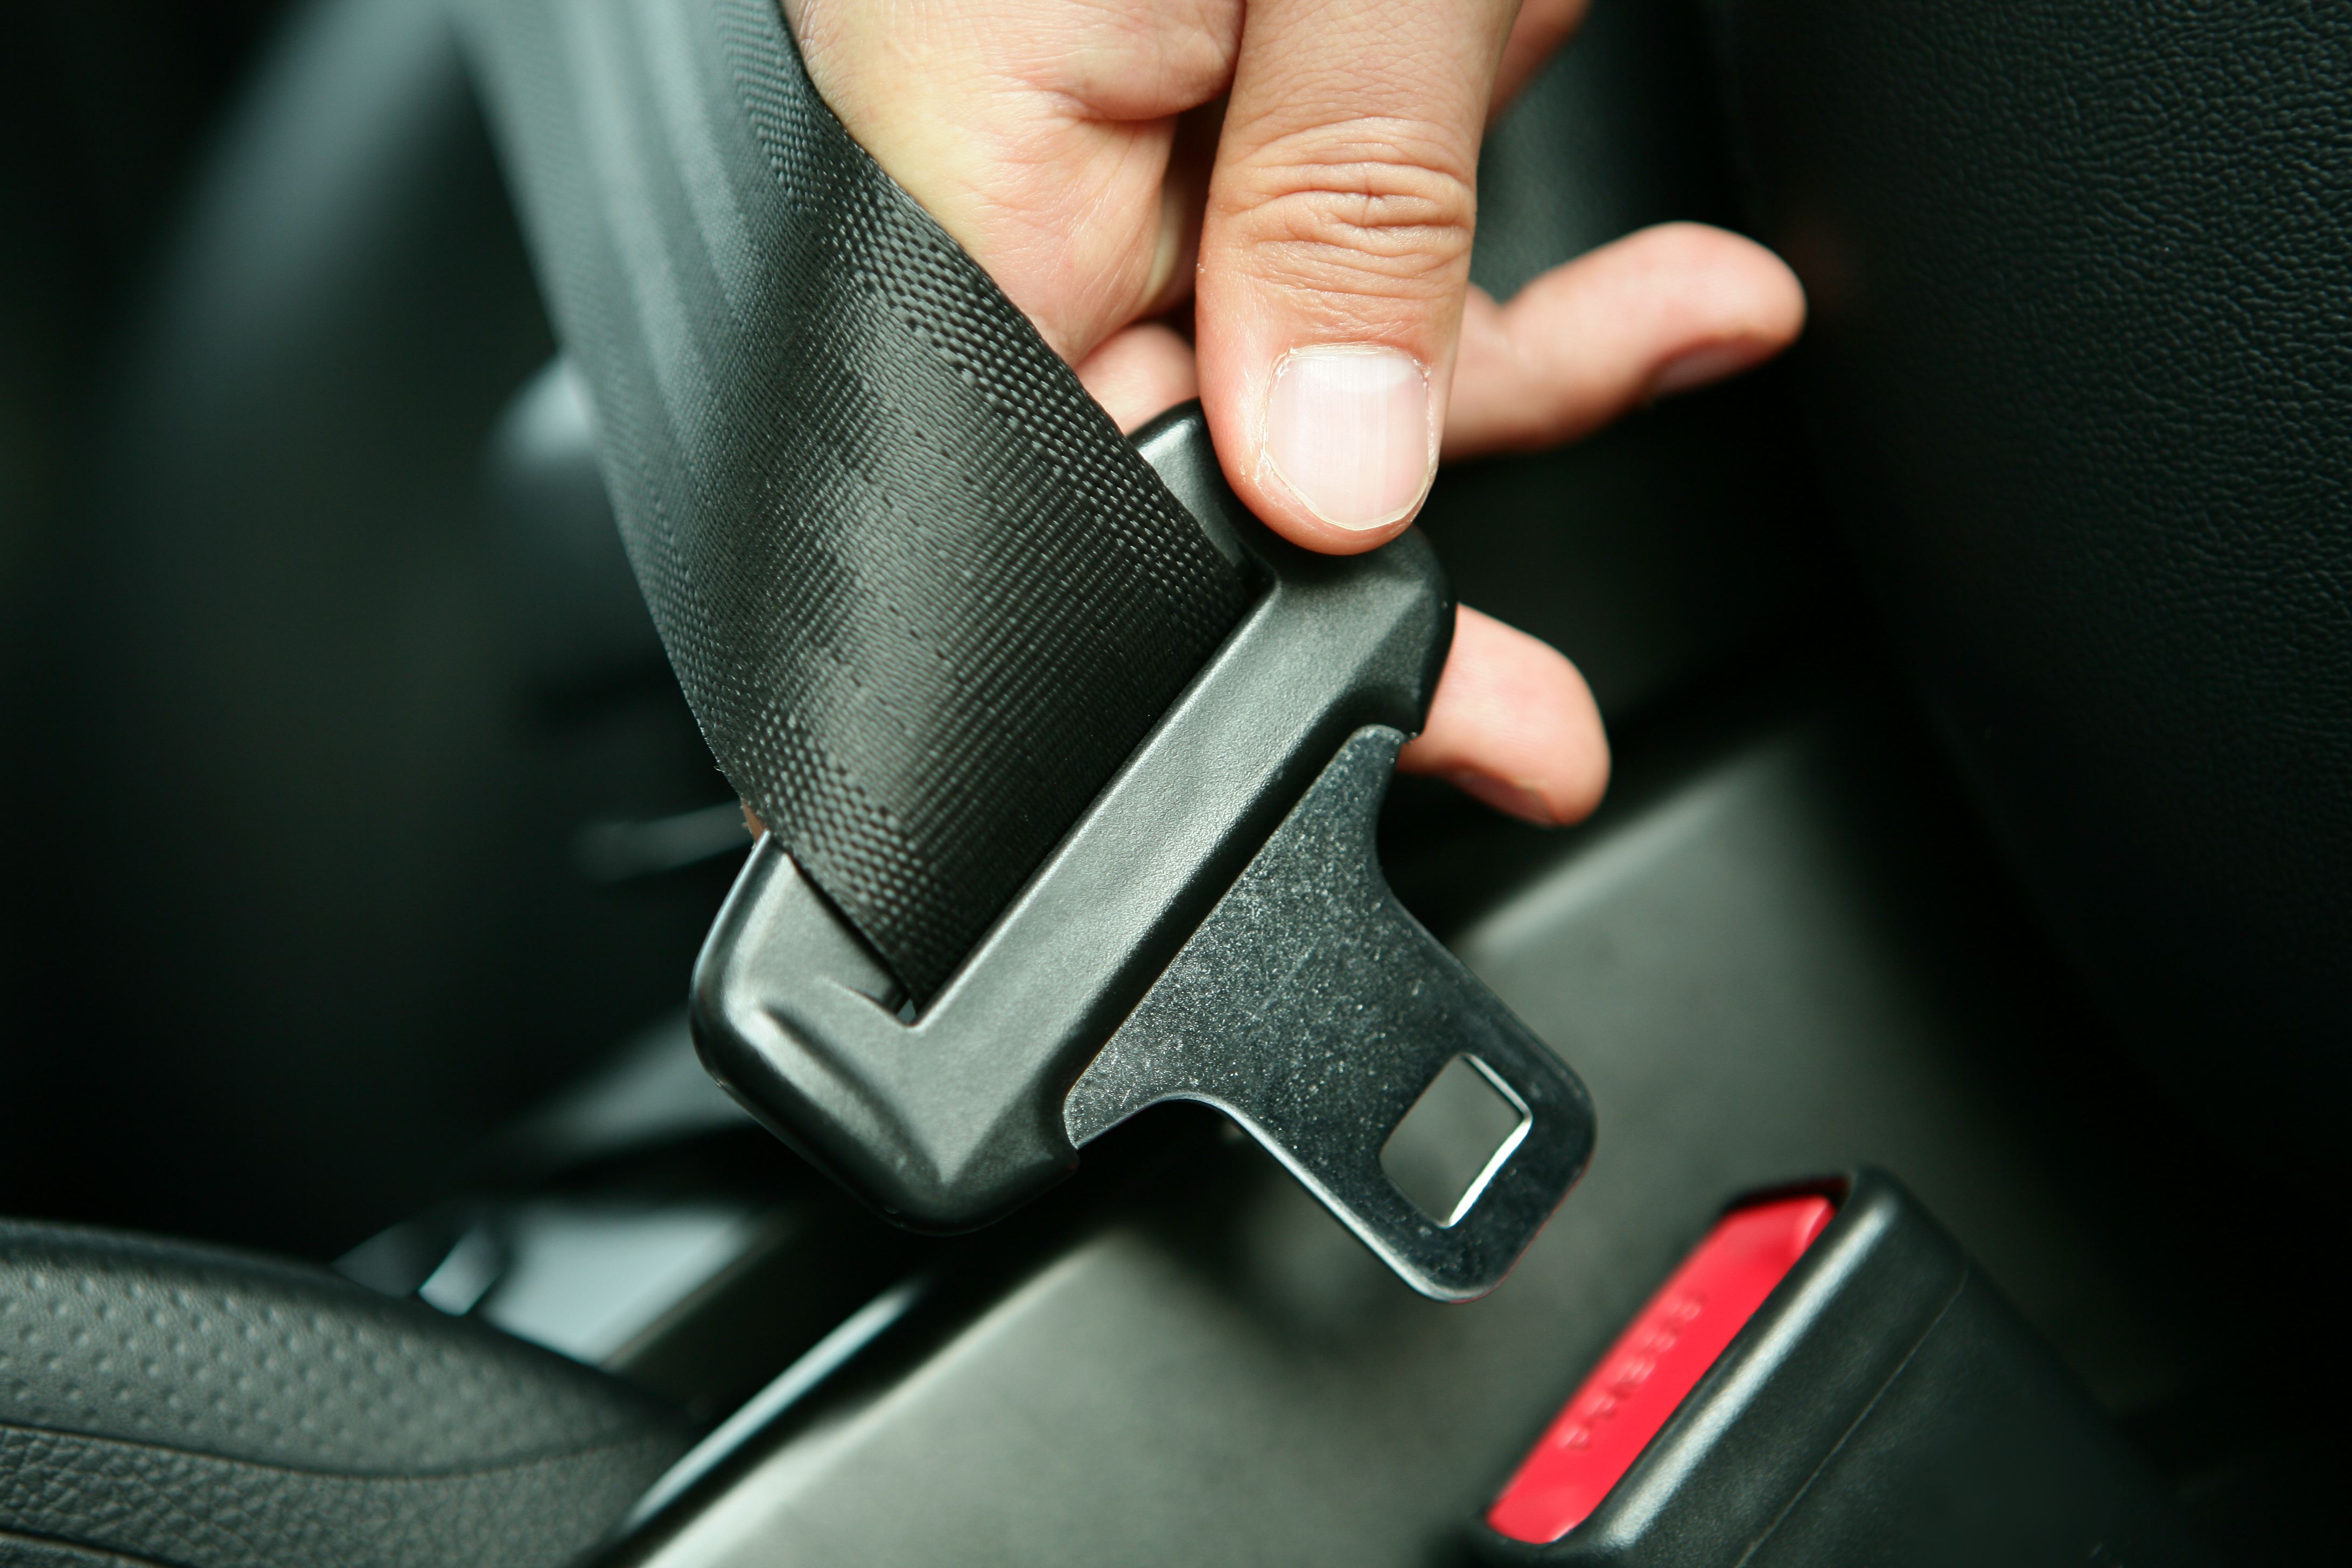 New Seat Belt Law in NY Affects Ages 16 and Up